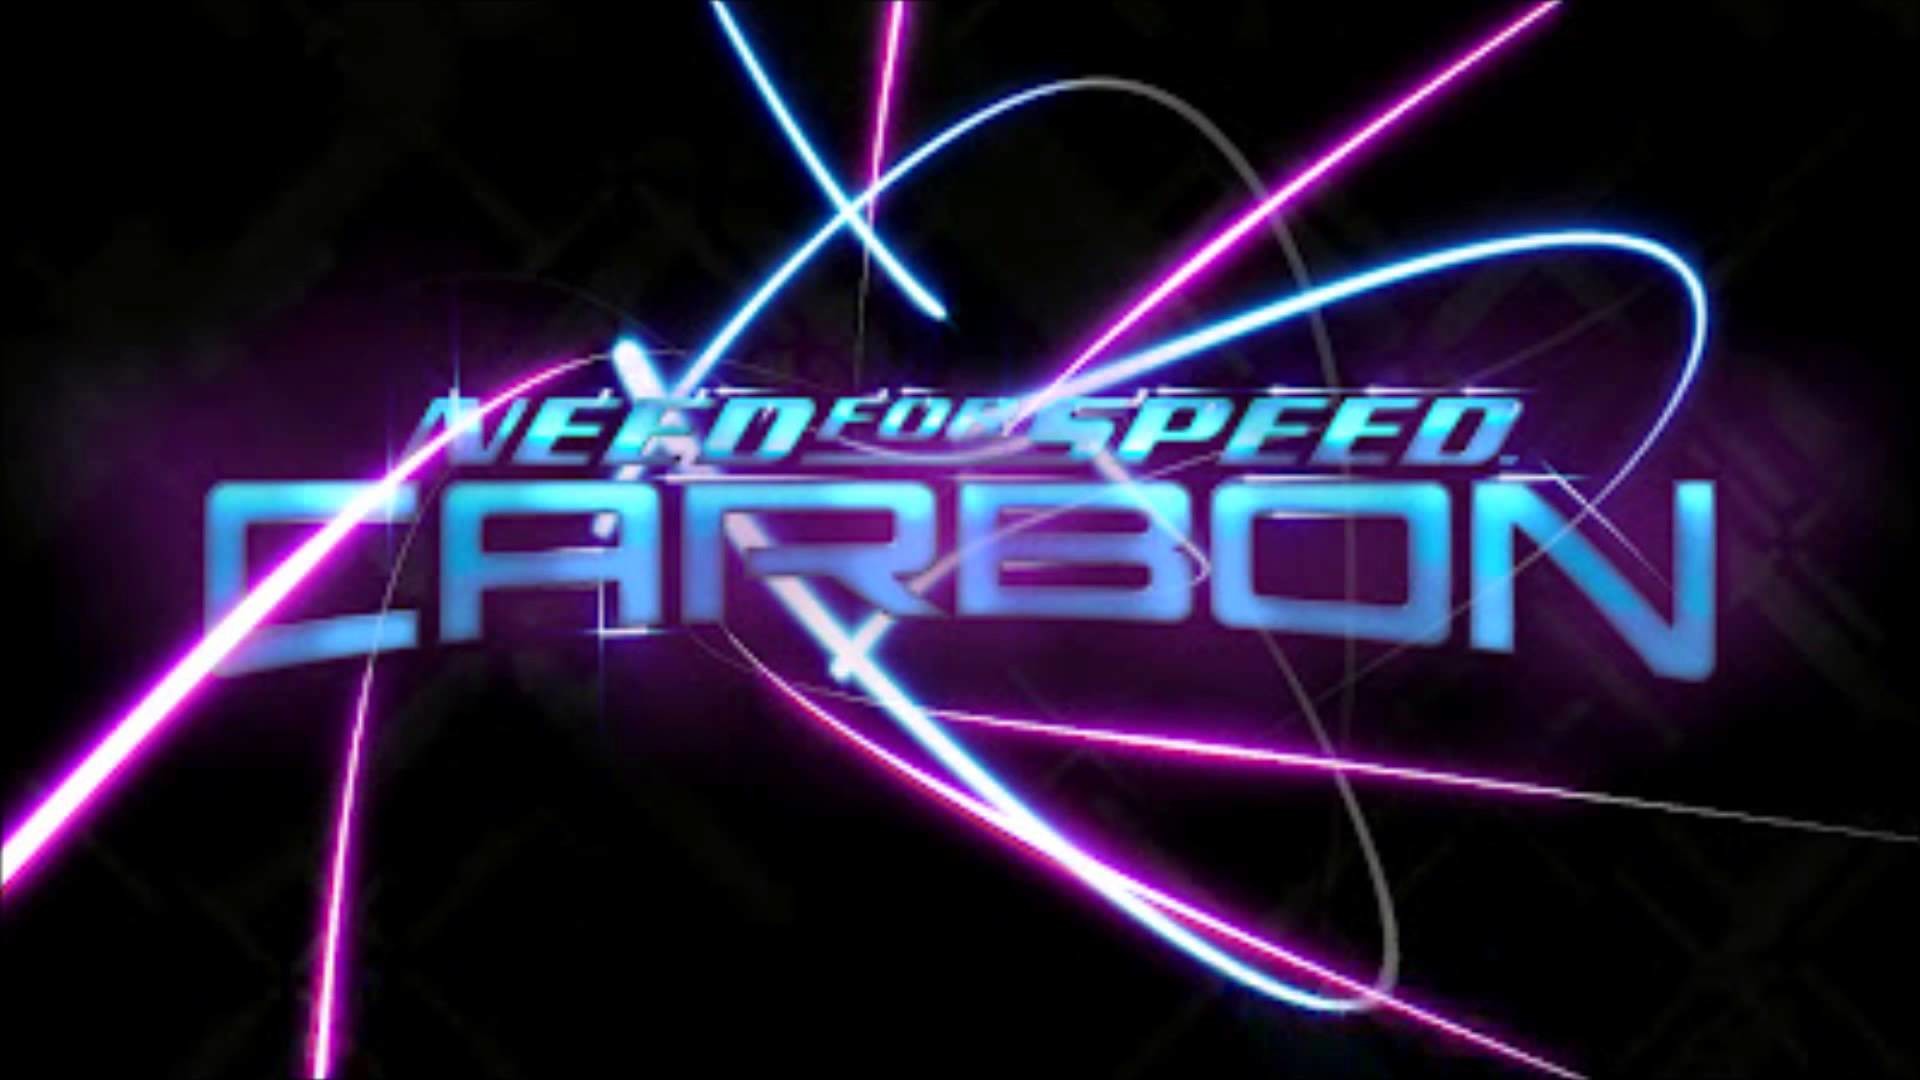 need for speed carbon wallpaper,violet,visual effect lighting,black,purple,text